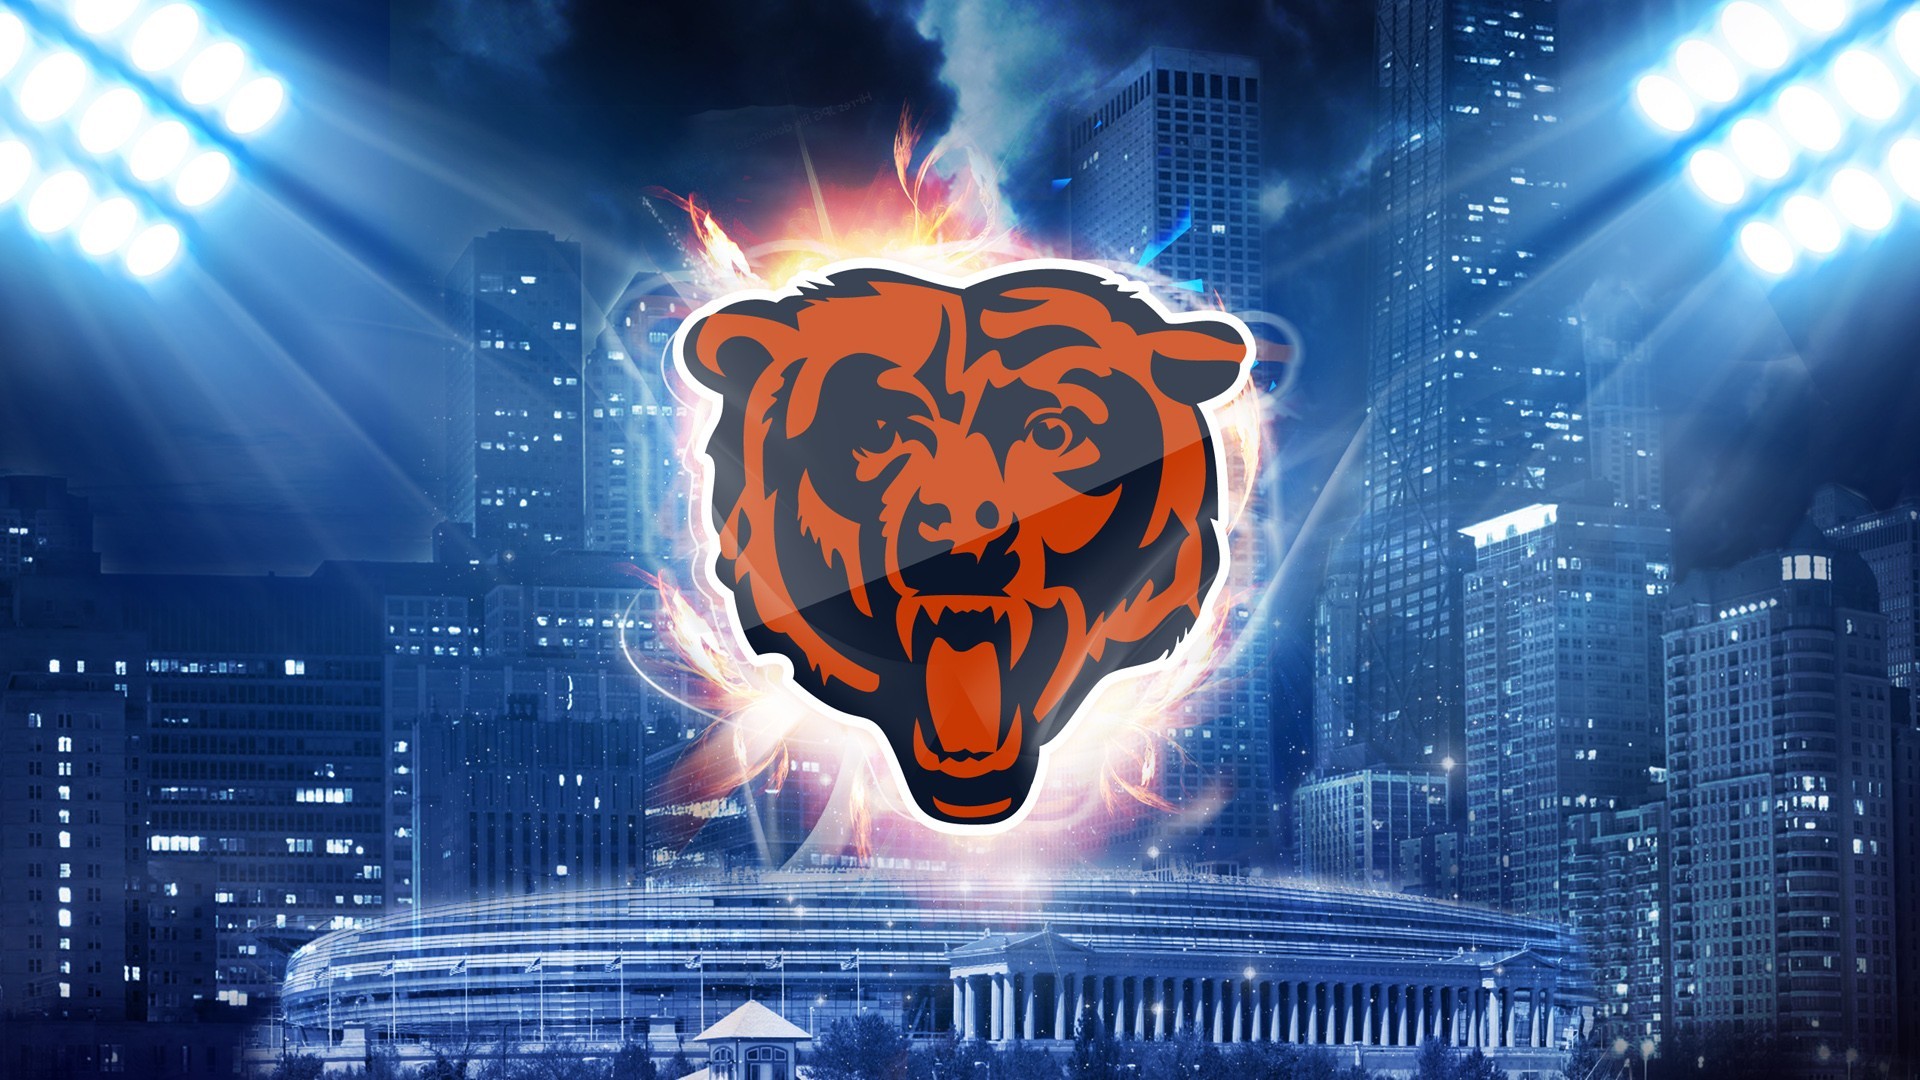 Chicago Bears Live Wallpaper Best Cars Res